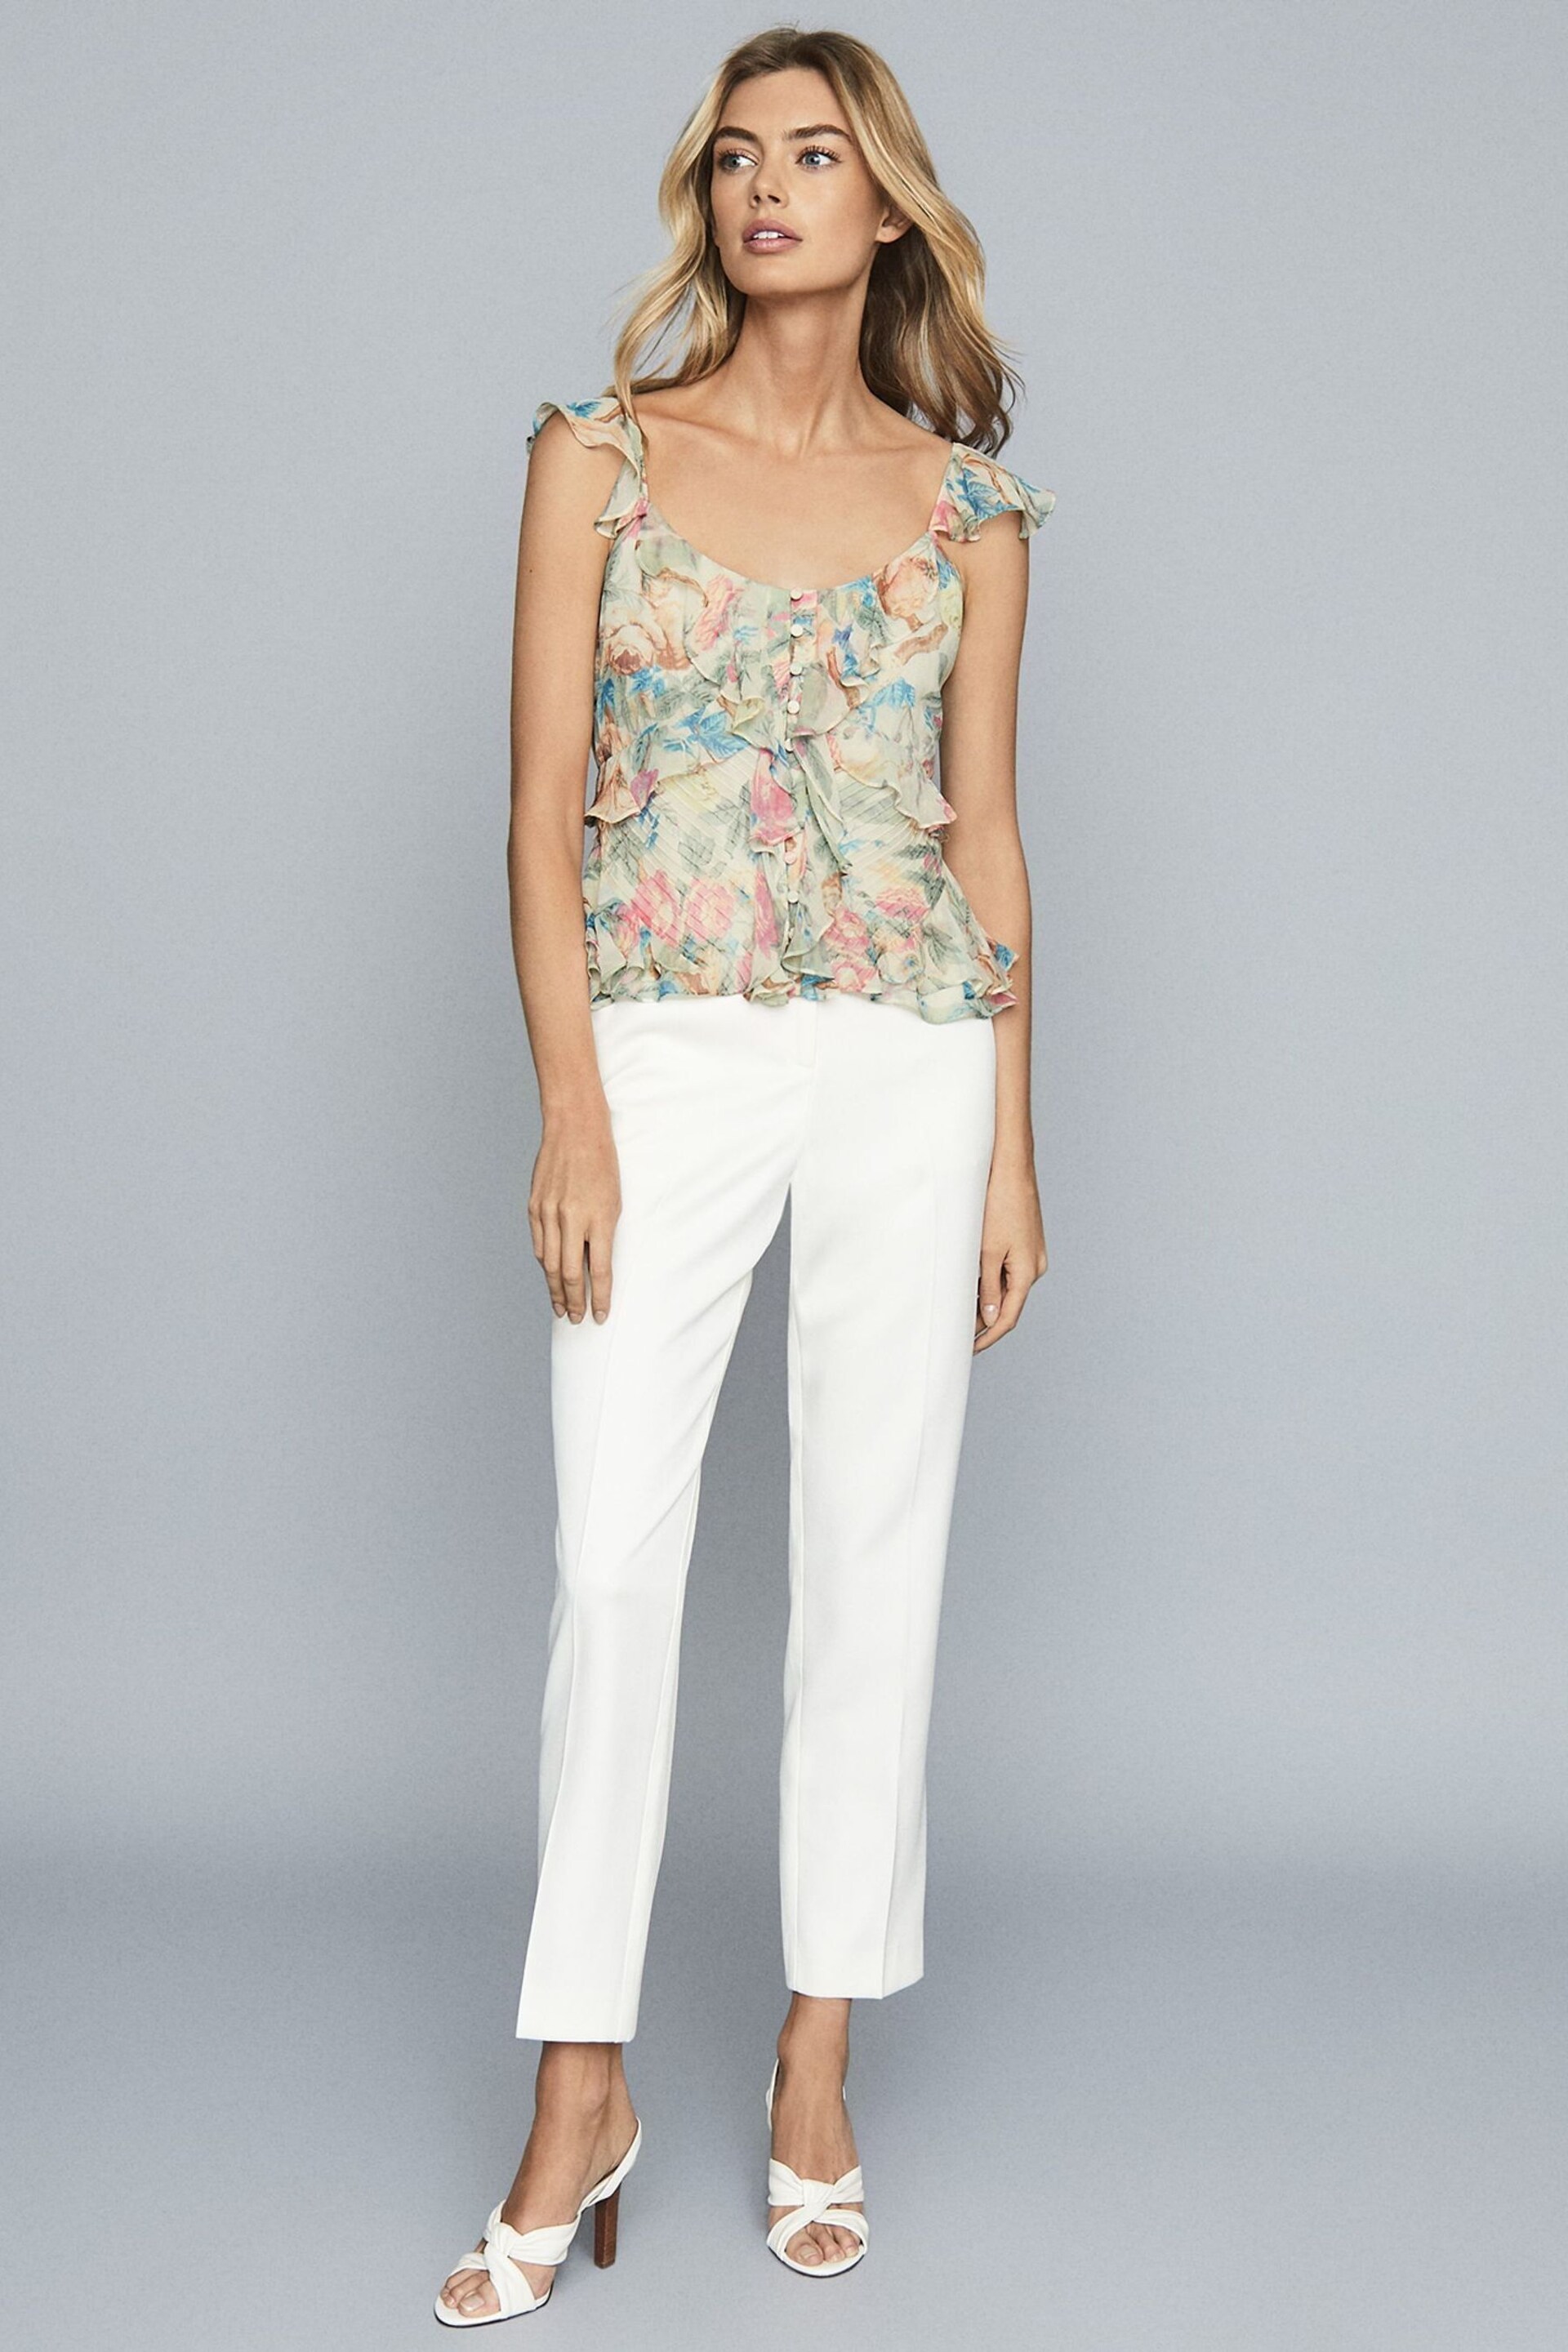 Reiss Lana Floral Cami Top - Image 3 of 5